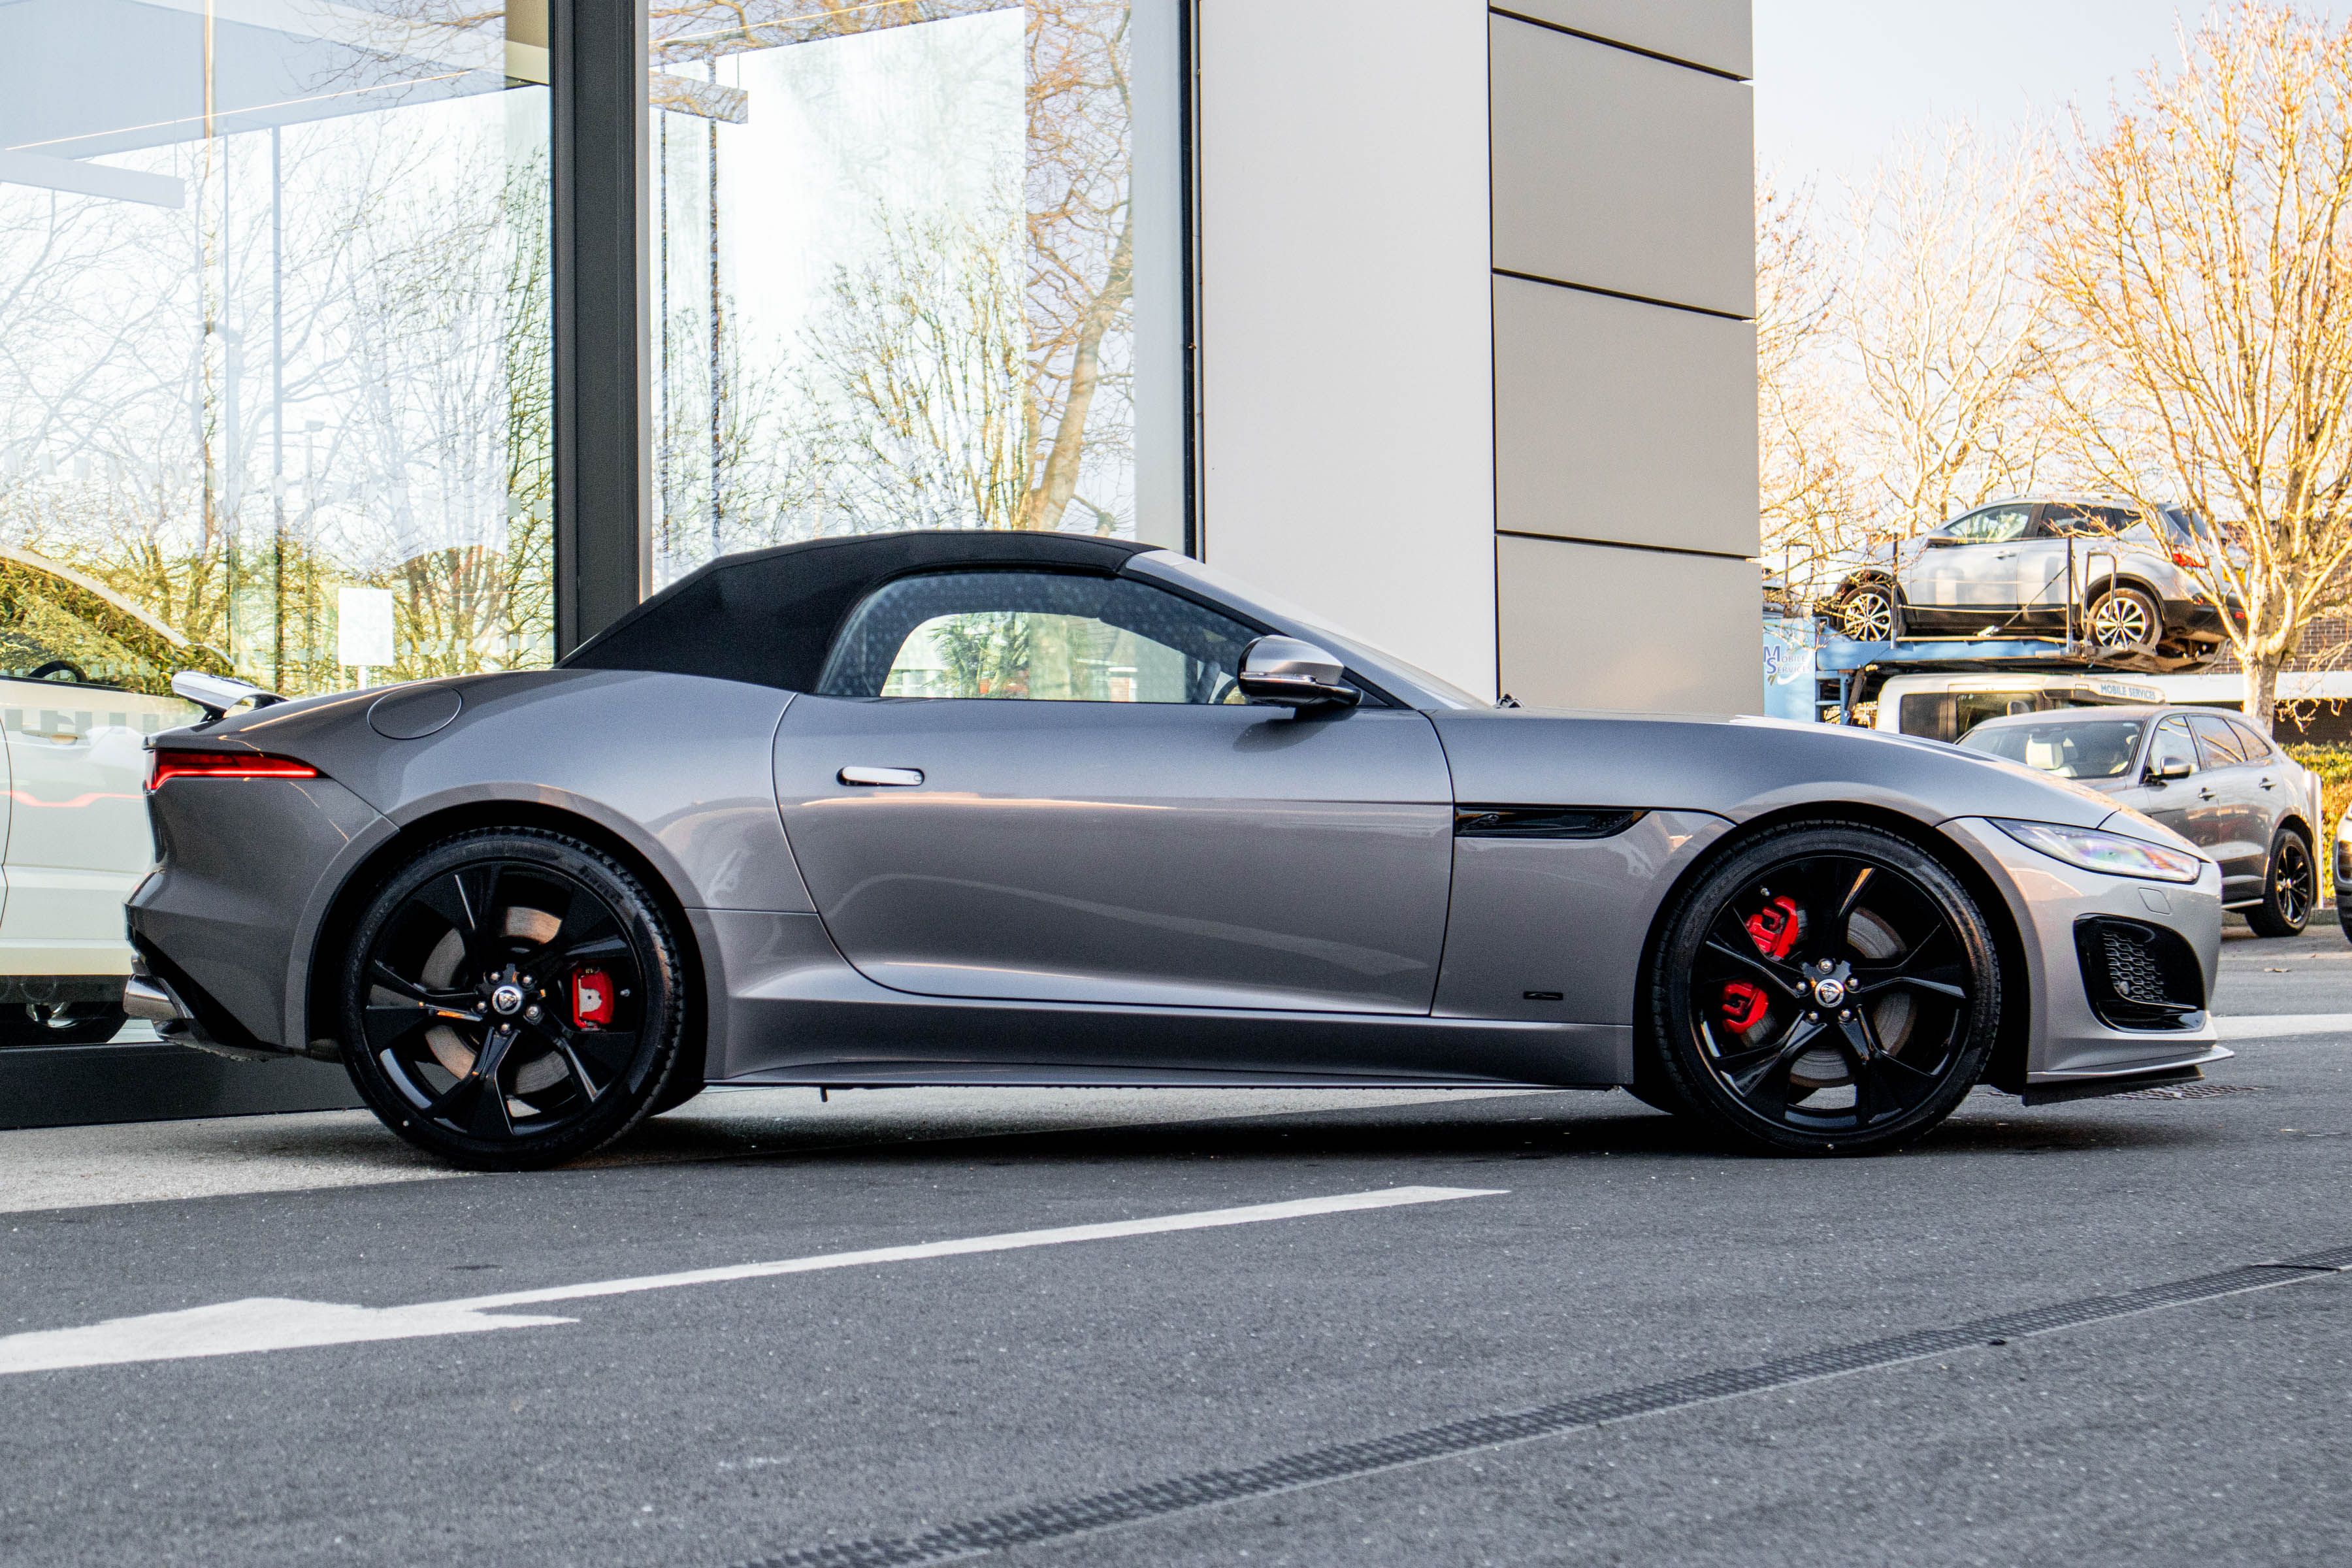 F-TYPE 5.0 P450 SUPERCHARGED V8 75 PLUS 2DR AUTO CONVERTIBLE